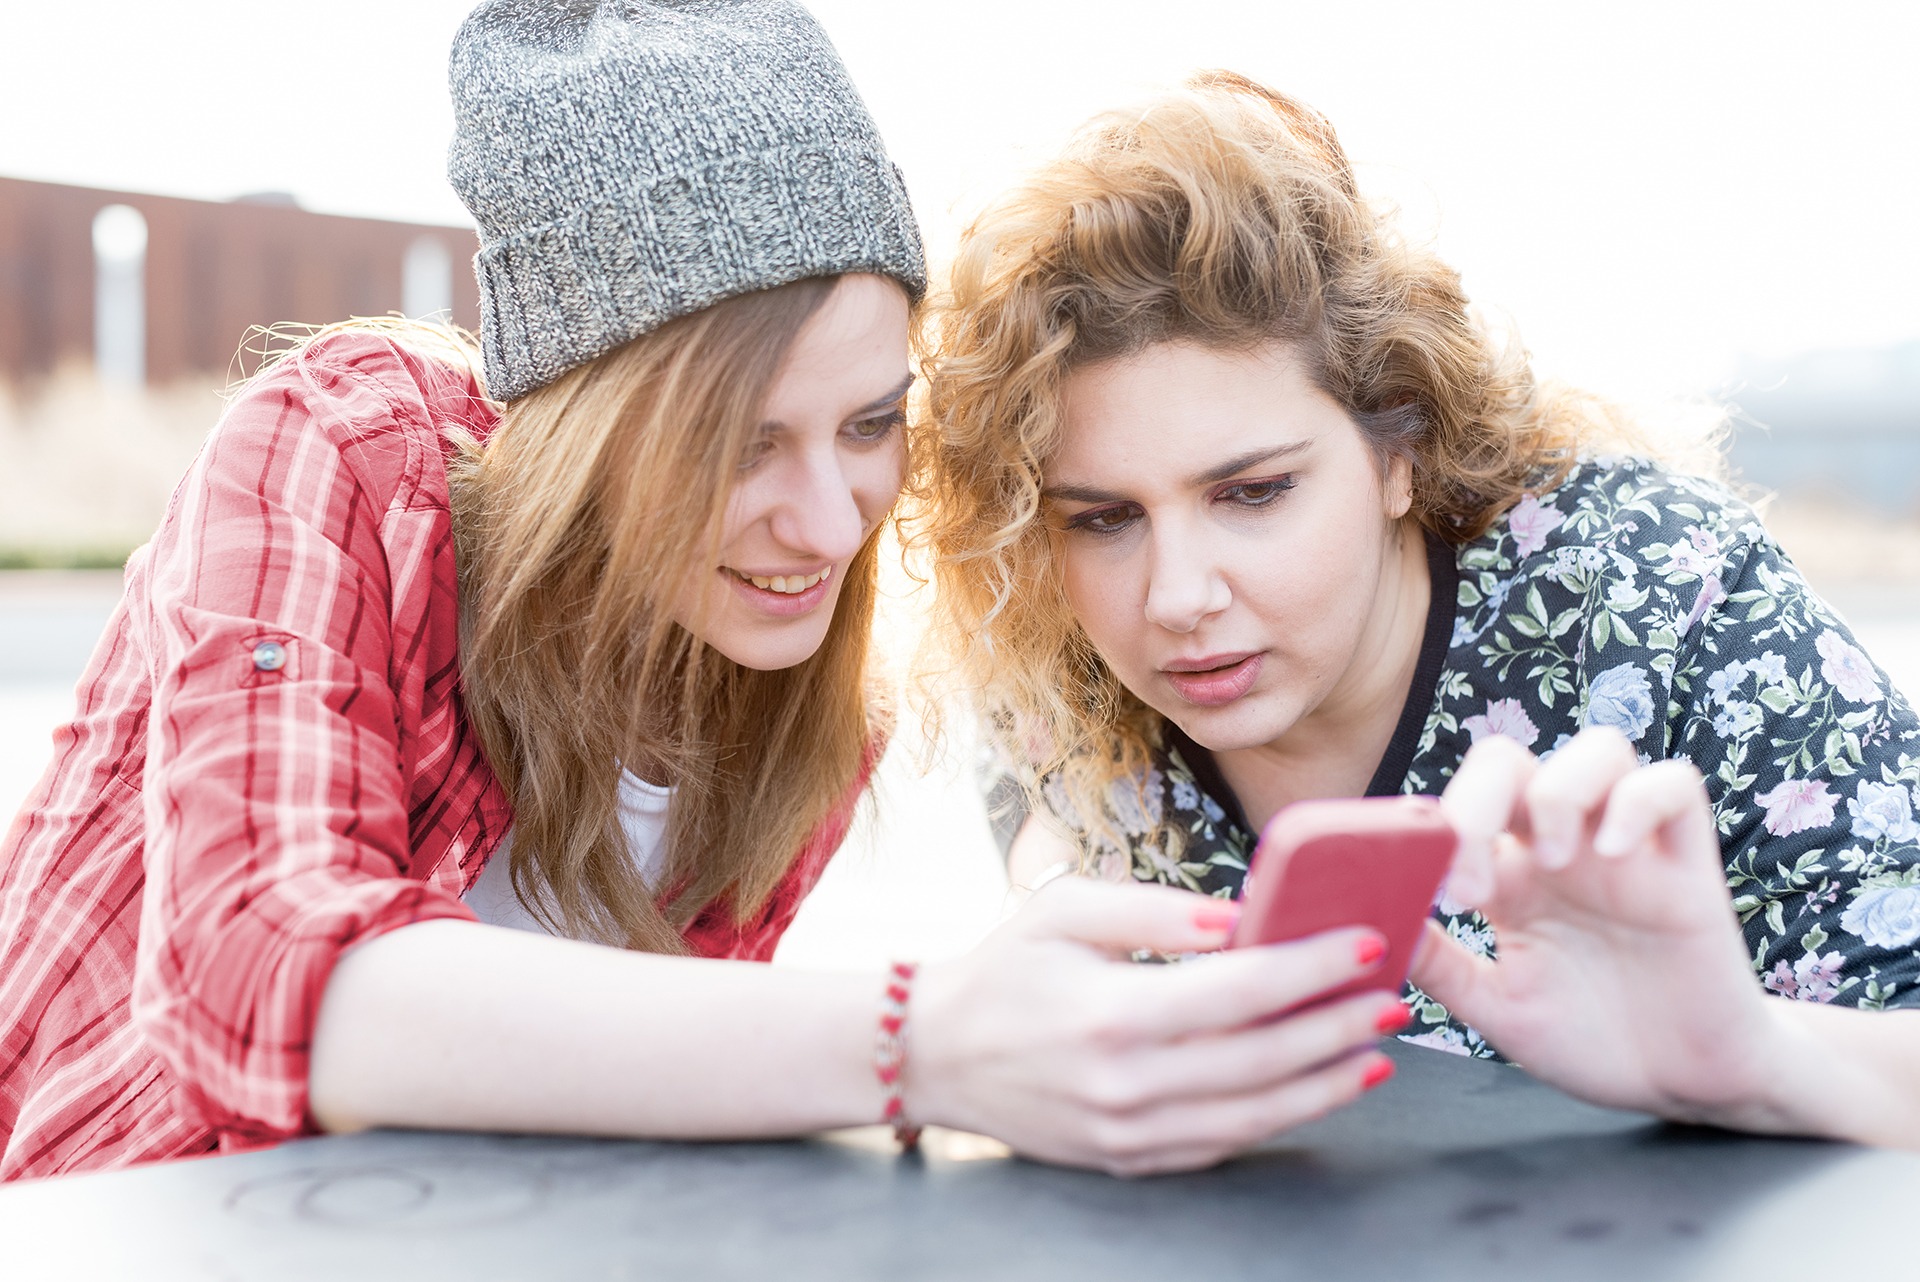 Two young woman looking at a phone